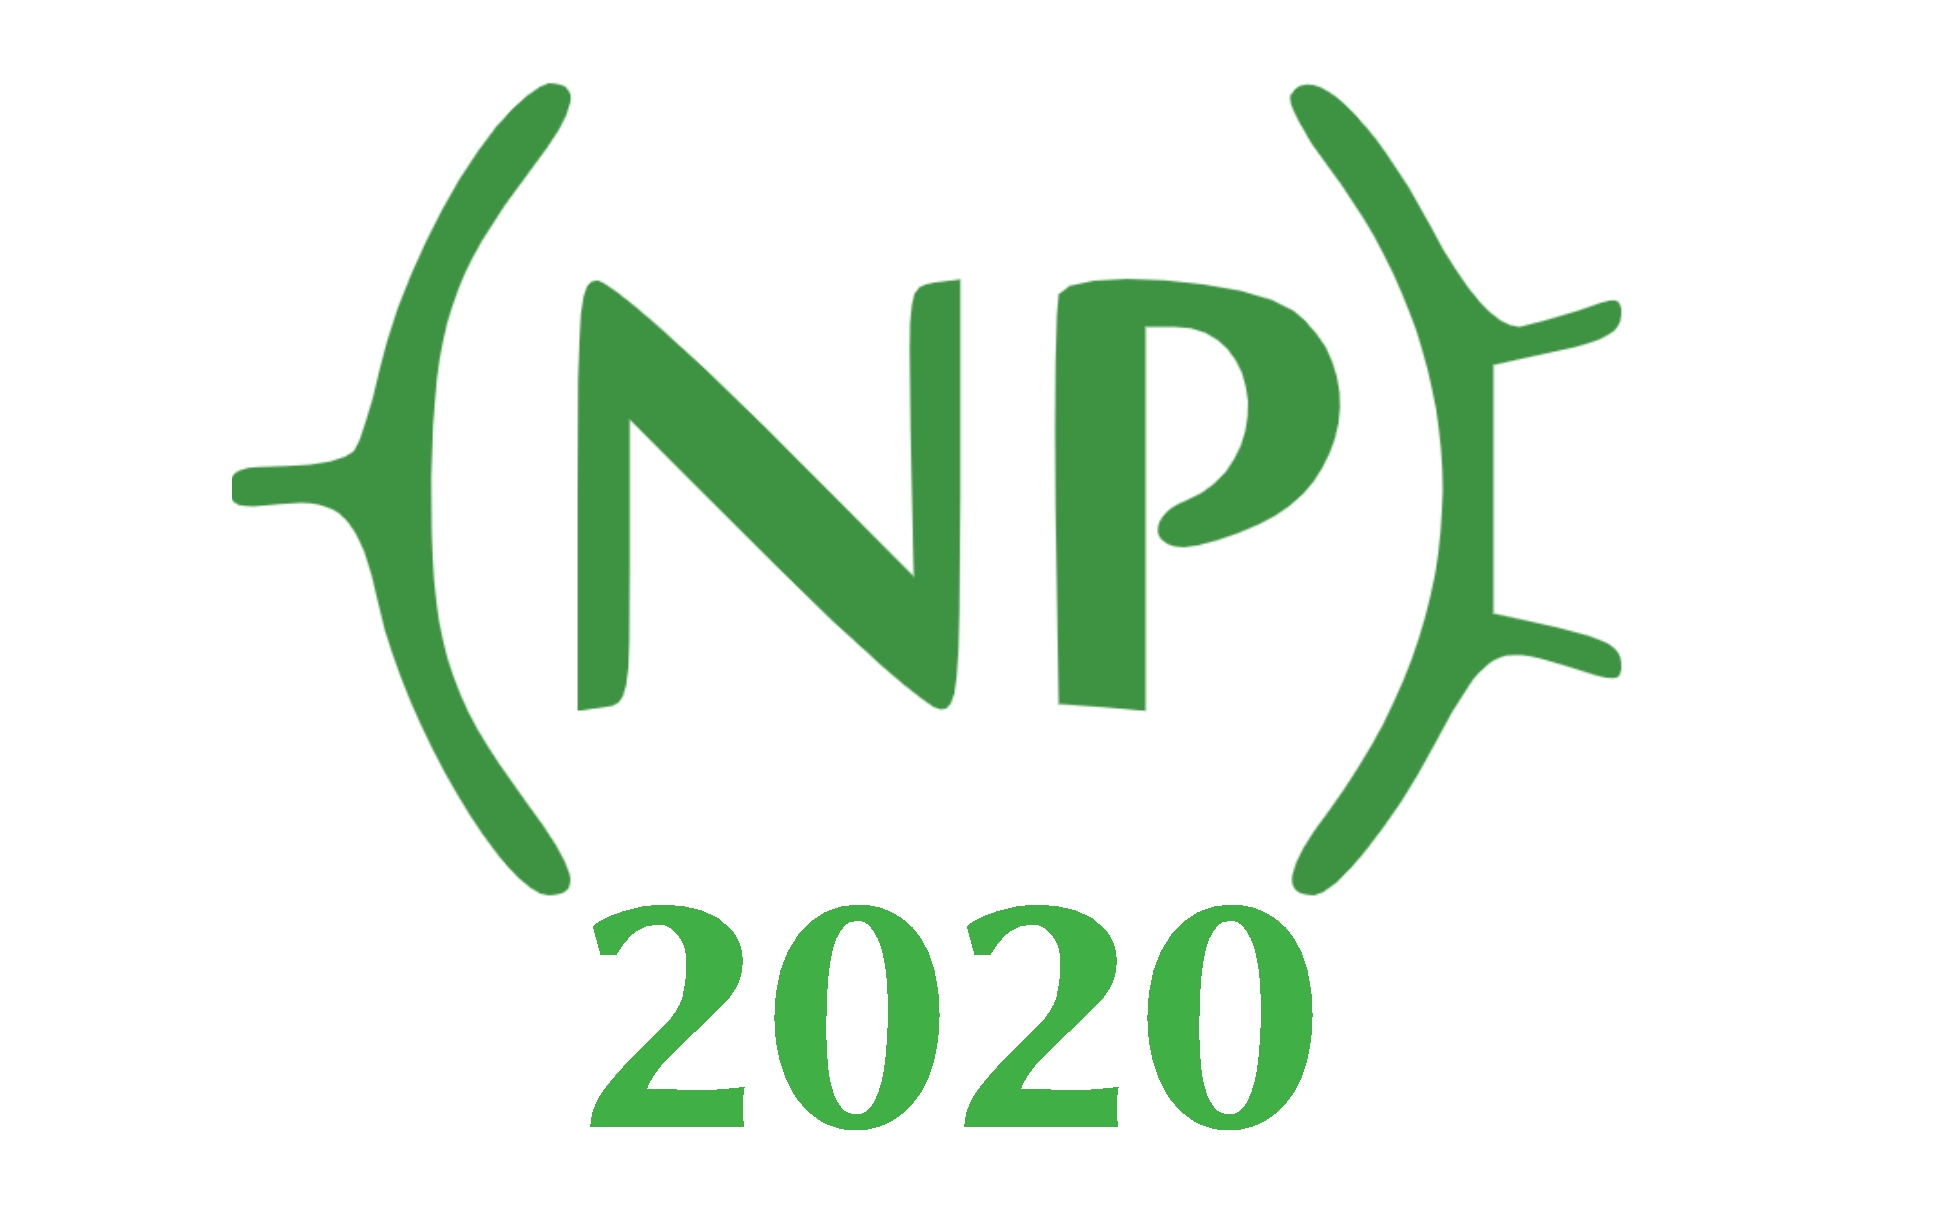 Neuropype 2020.0.0 is out!